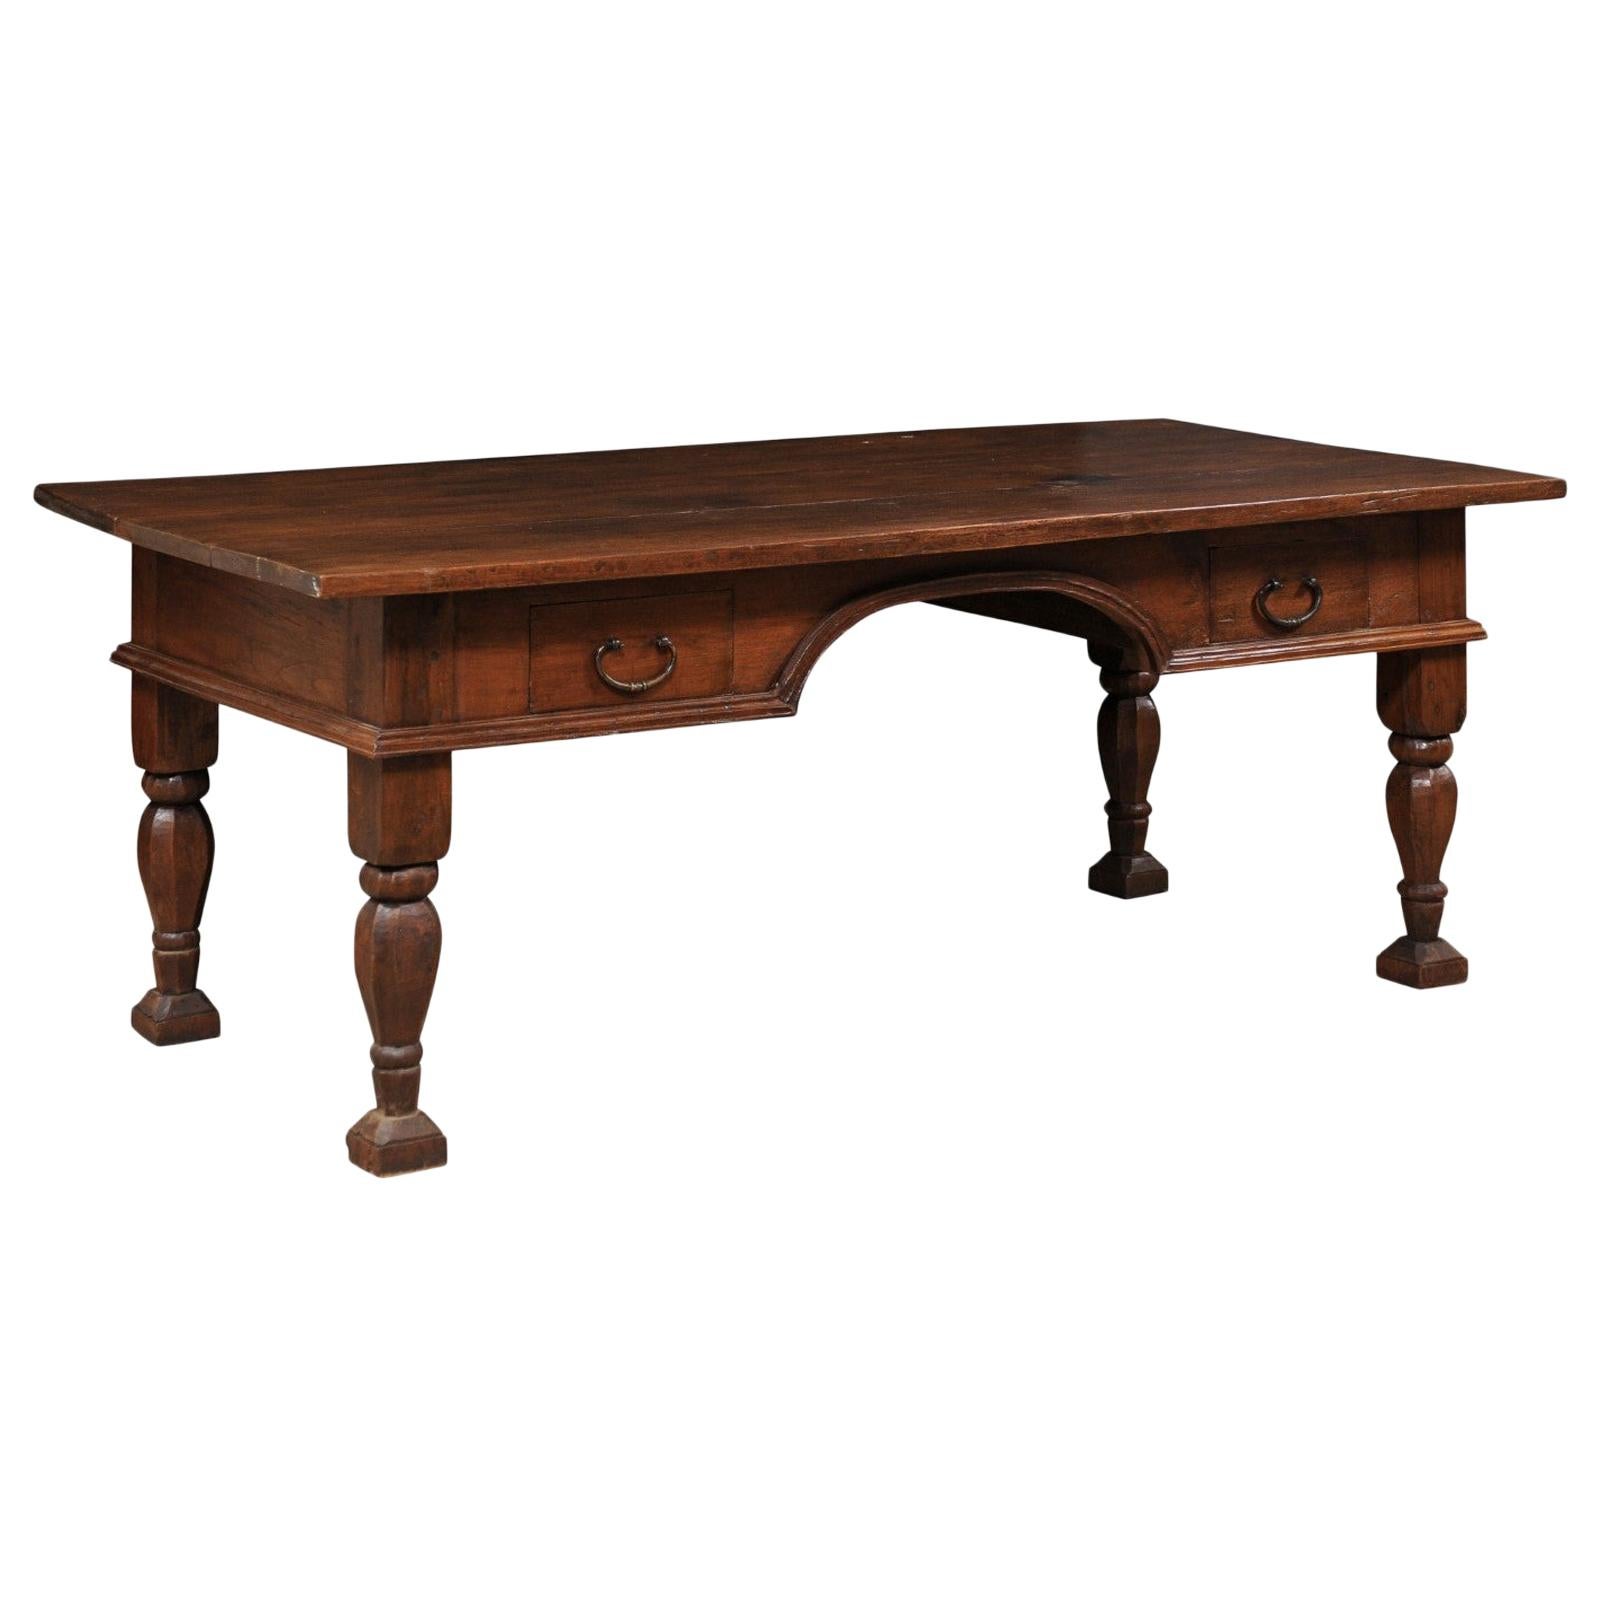 Large Brazilian Peroba Wood Executive Desk with Robustly-Carved Baluster Legs